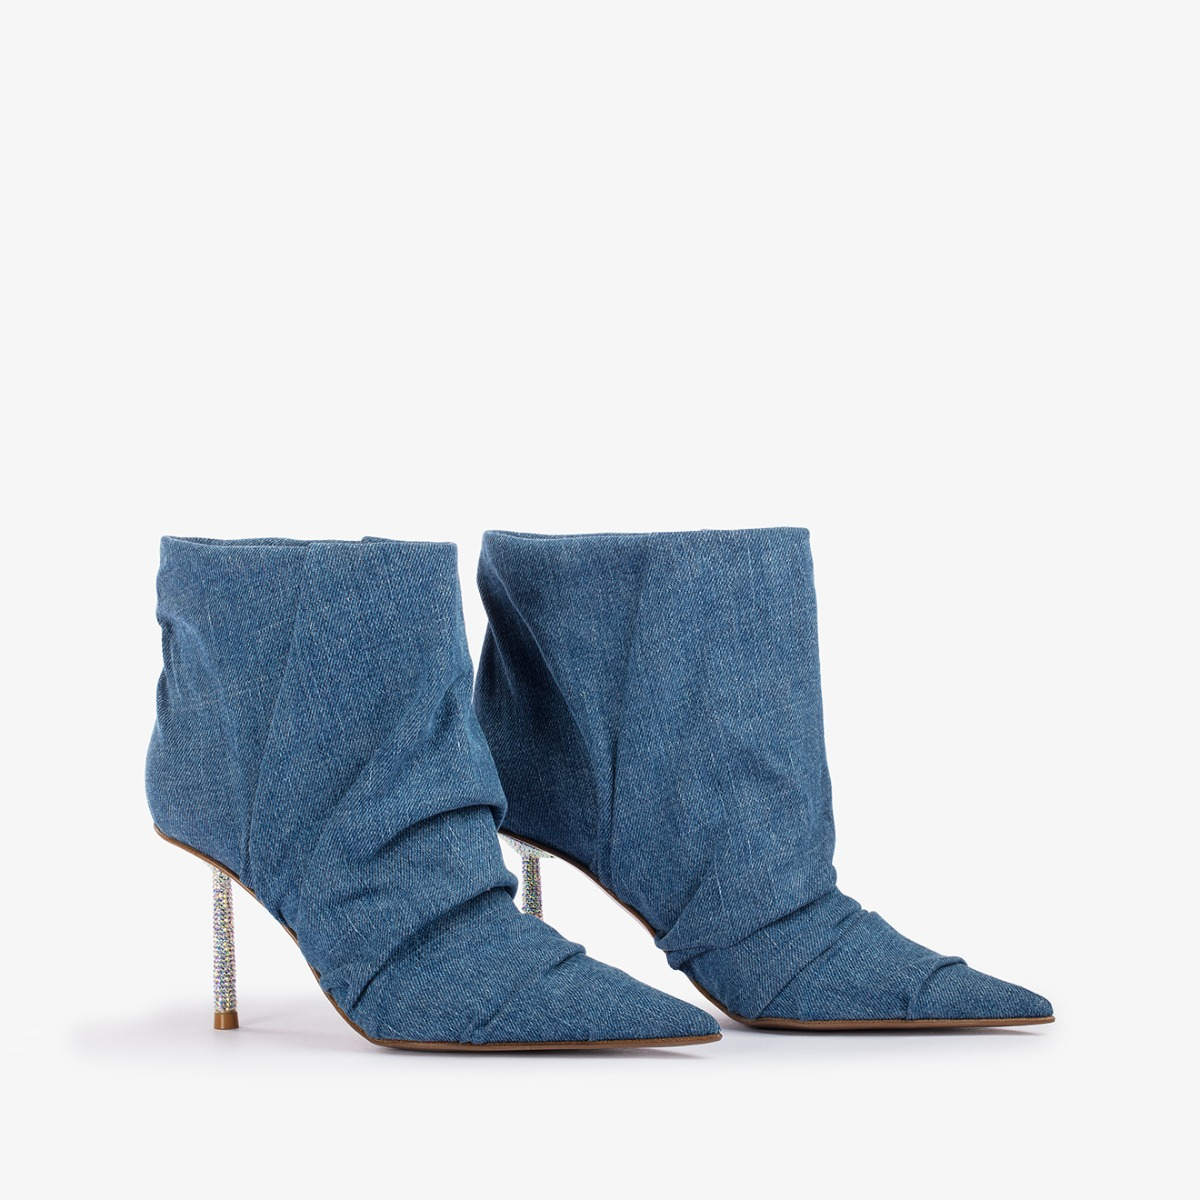 FEDRA ANKLE BOOT 80 mm - Le Silla official outlet